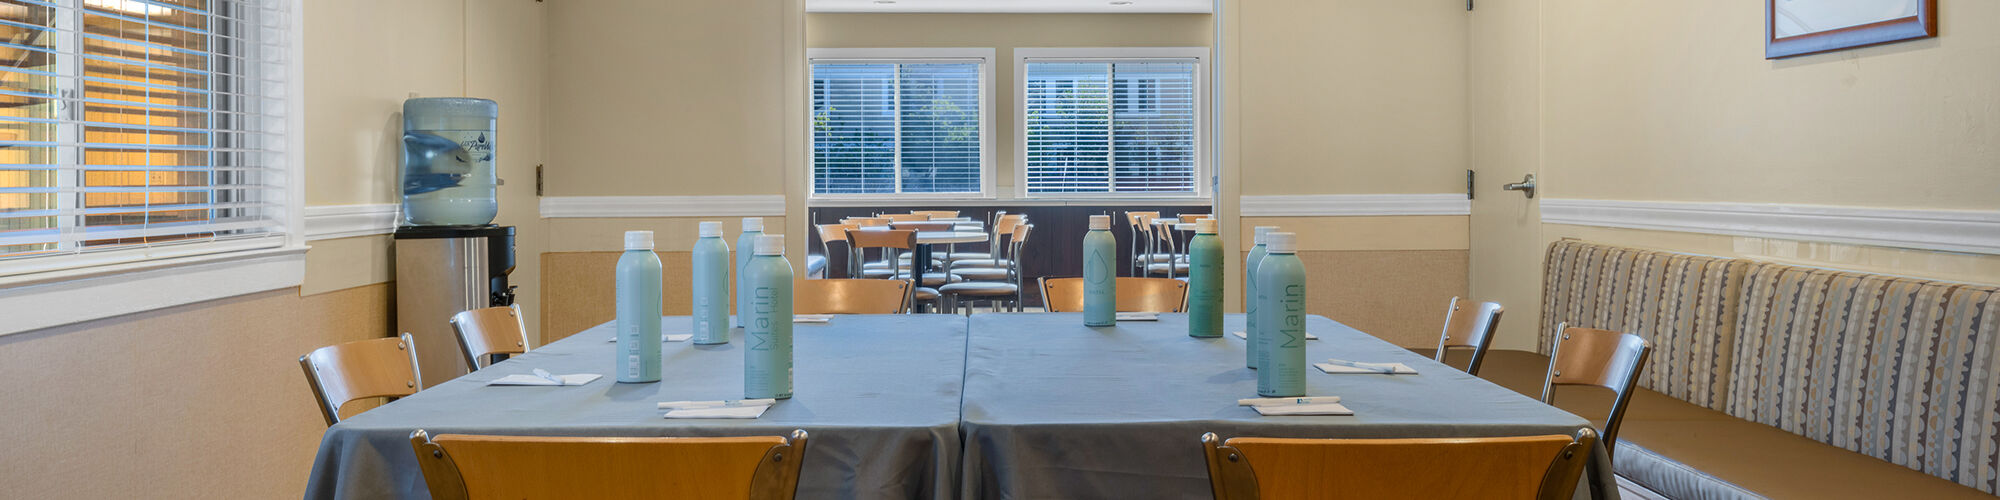 The image shows a small dining or meeting room with a table covered in a gray tablecloth, chairs around it, and bottles of water on the table.